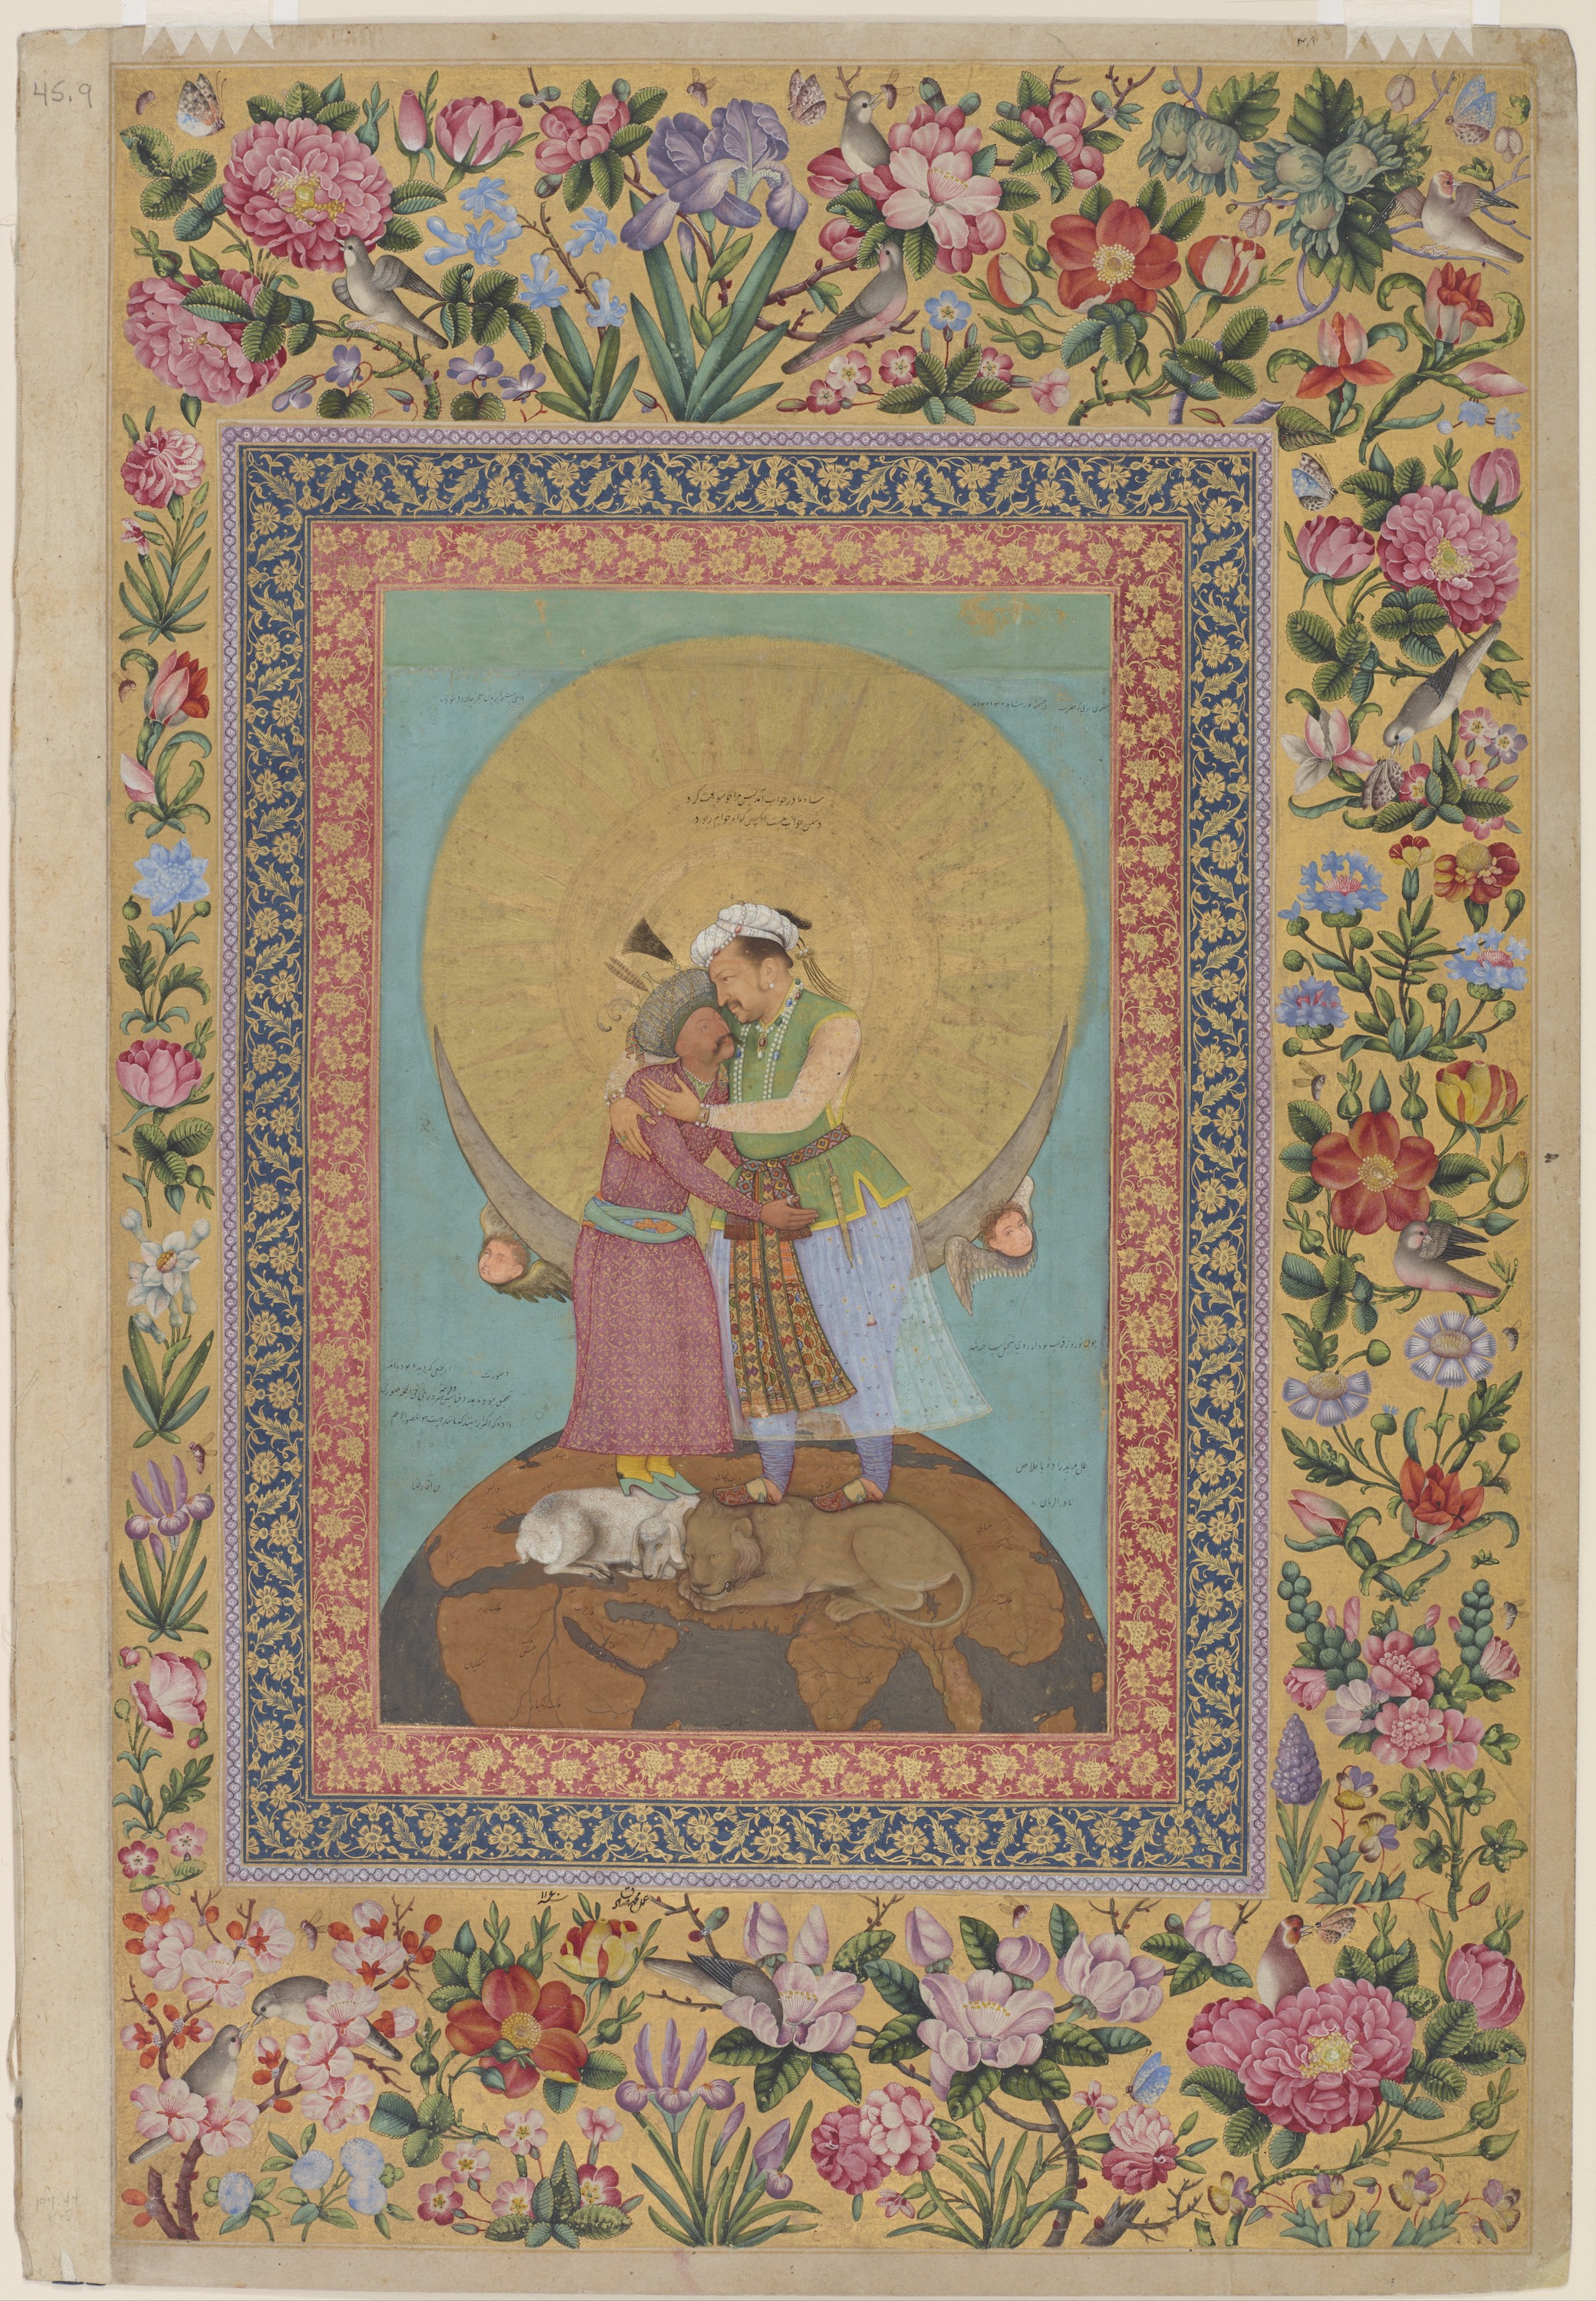 Allegorical representation of Emperor Jahangir and Shah Abbas of Persia by Abu al-Hasan - ca. 1618; margins 1747–48 - 9 3/8 x 6 1/16 in National Museum of Asian Art